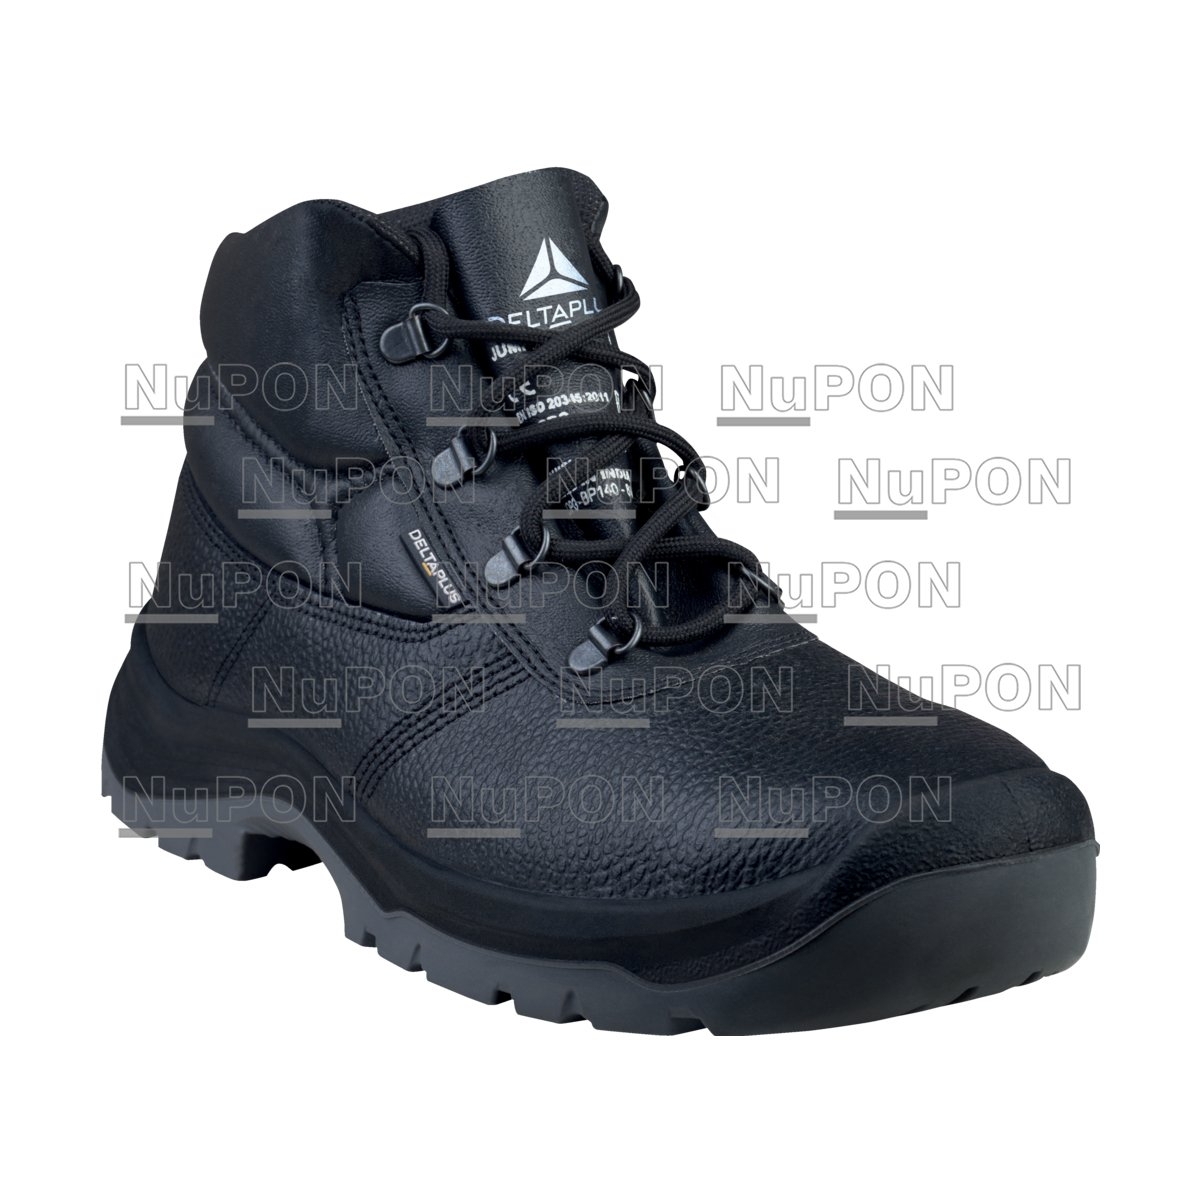 Jumper3 S1 ESD Safety Shoes